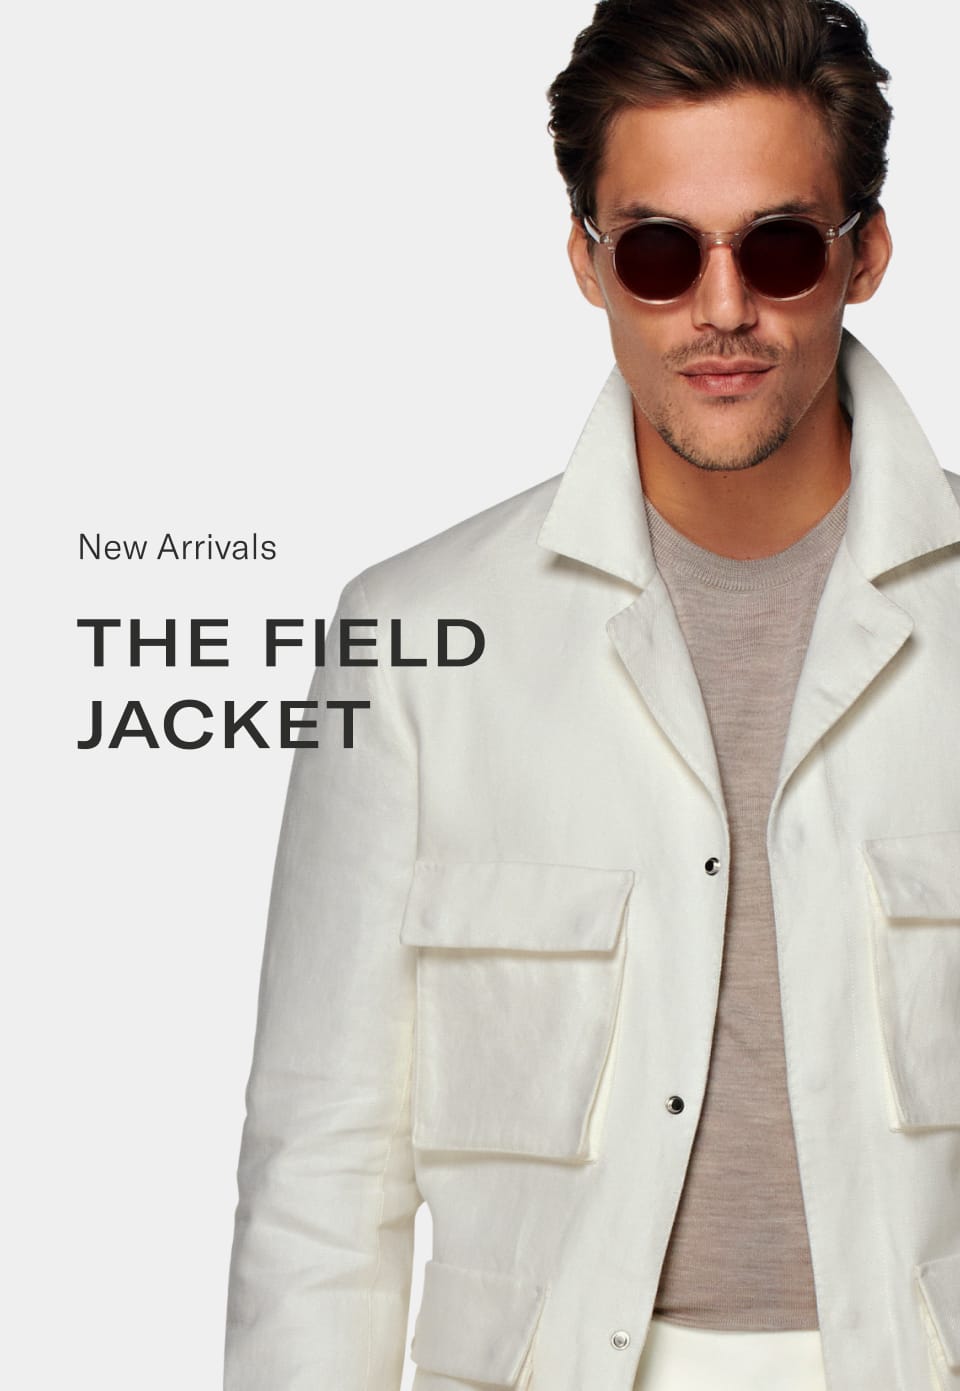 New Arrivals the Field Jacket